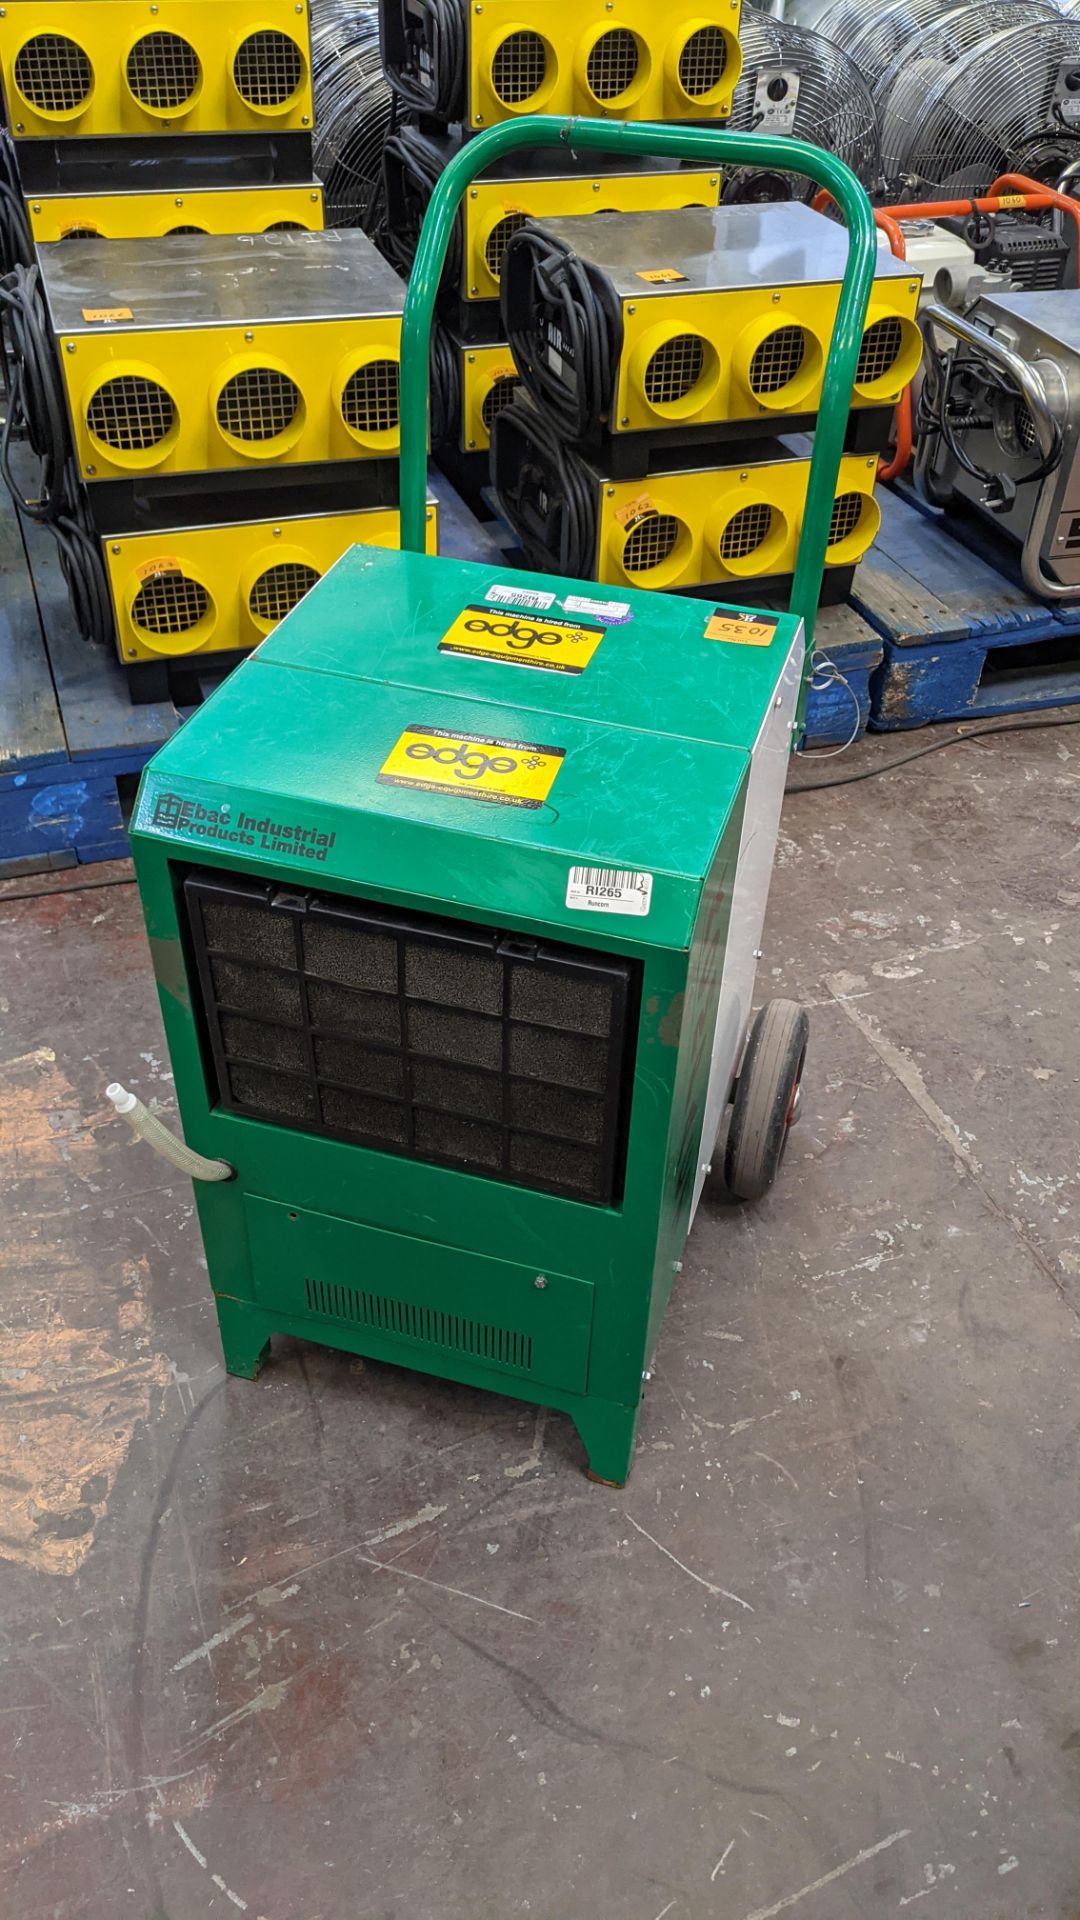 Ebac Industrial Products Limited Kompact industrial dehumidifier. 10,597 recorded hours